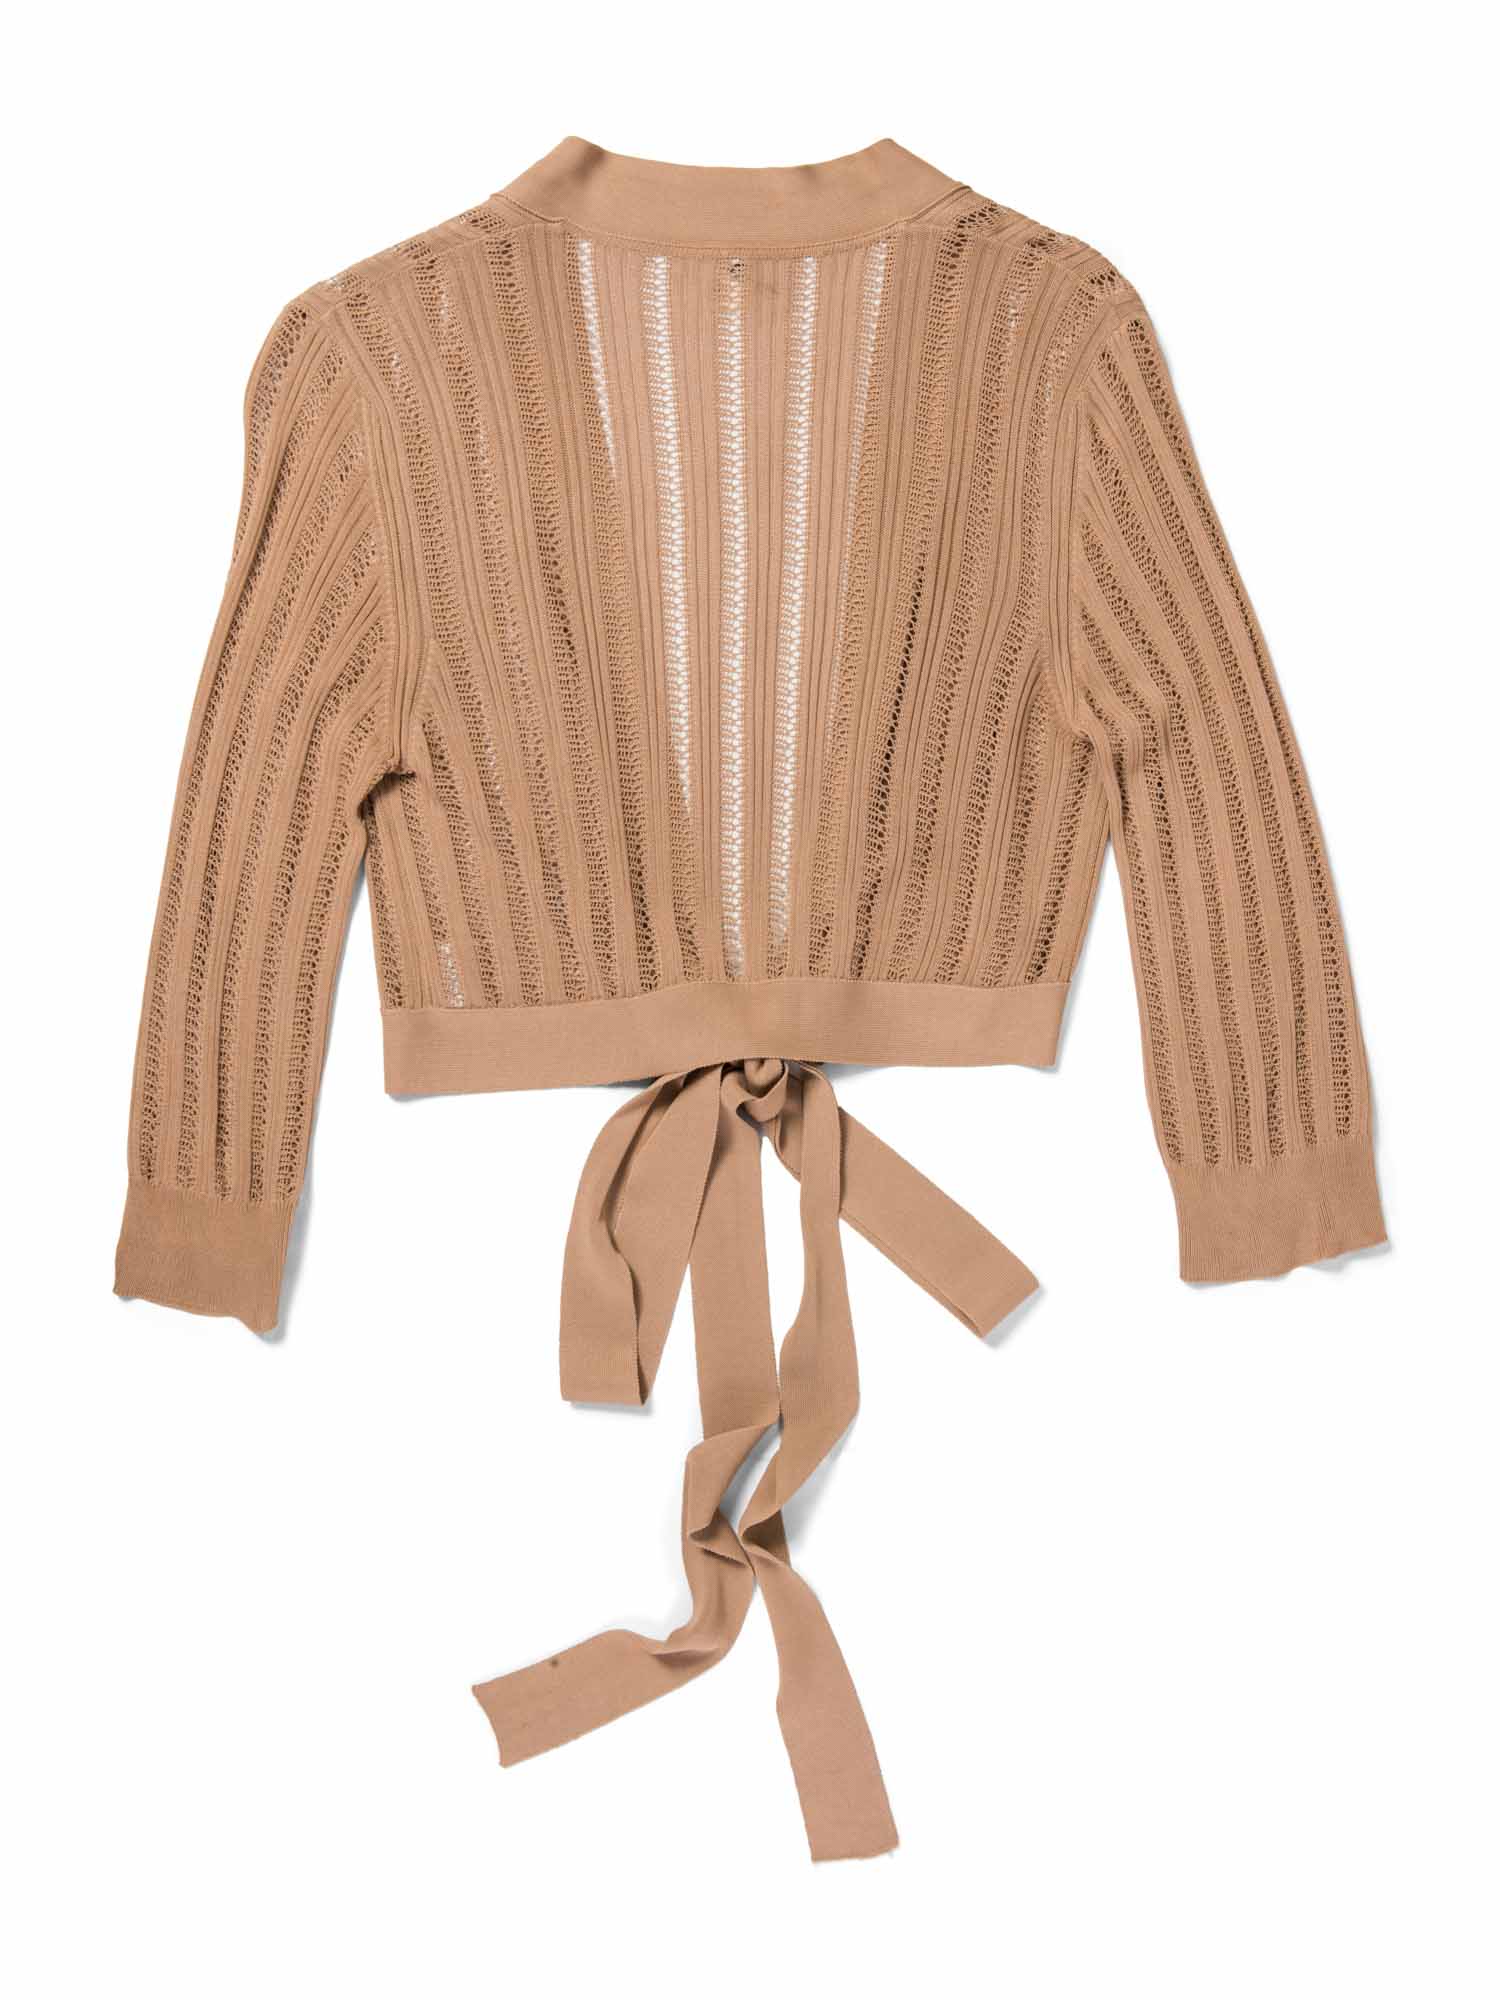 Hermes Knitted Wrap Bolero Top Taupe